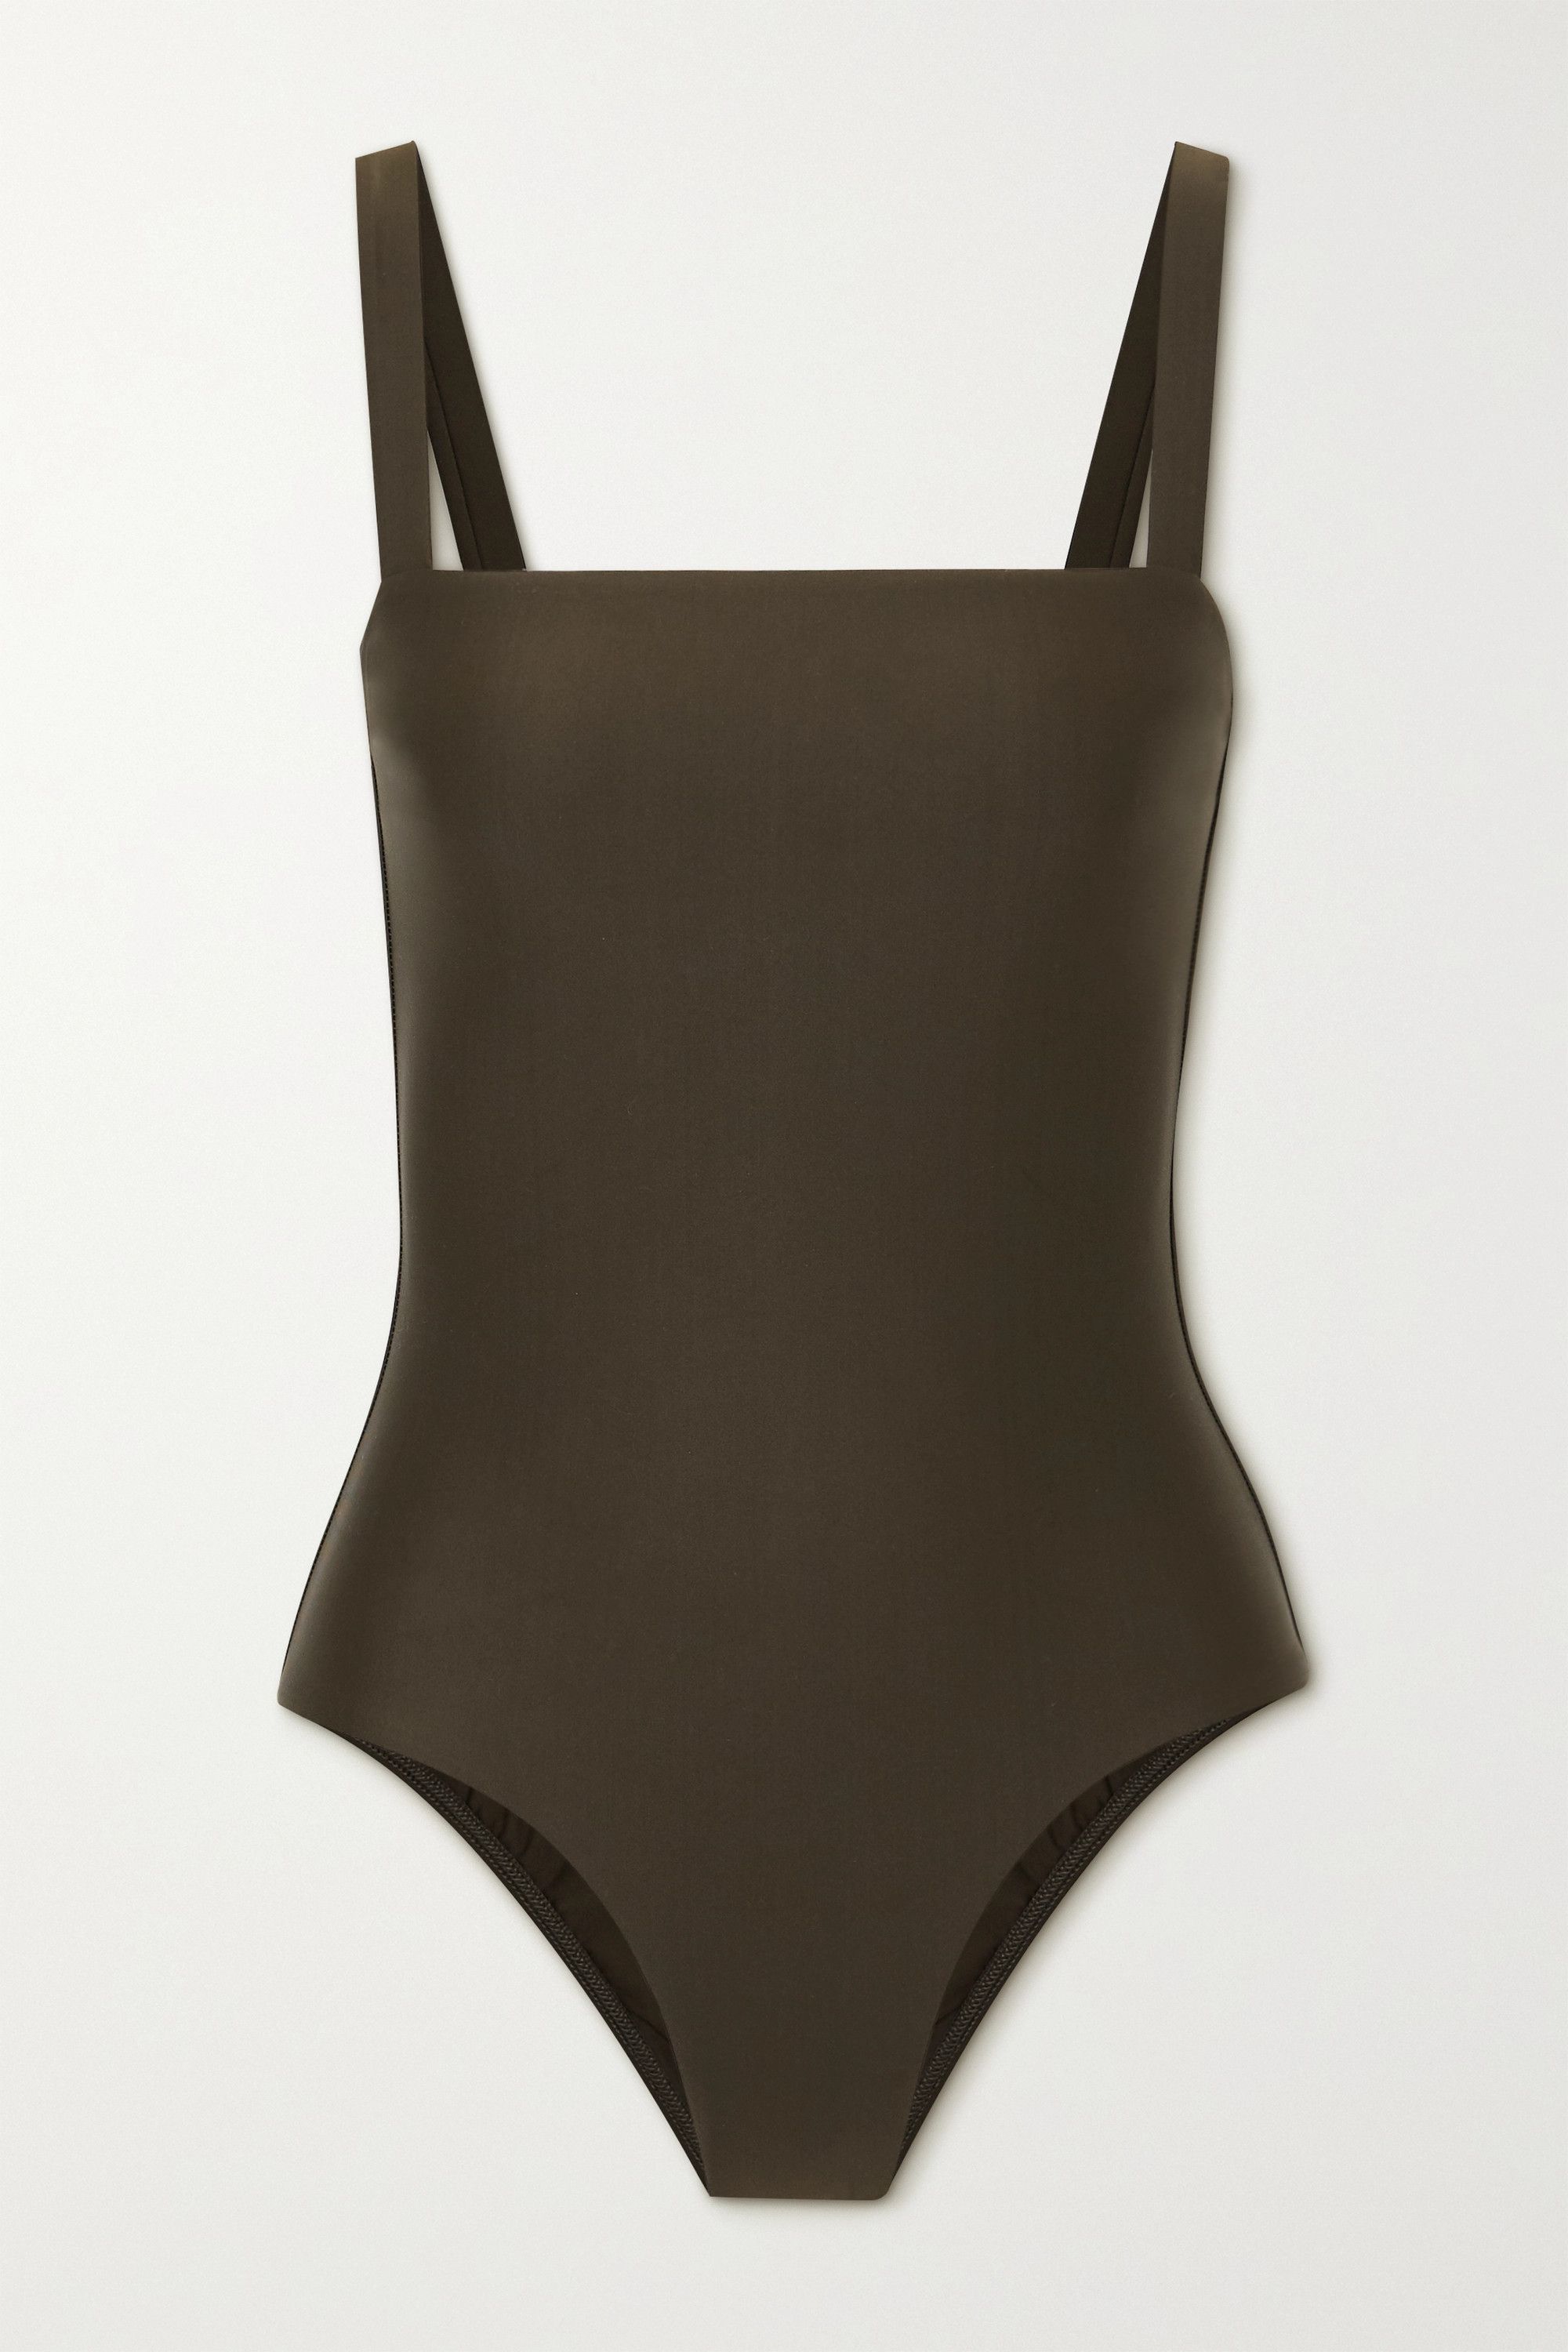 Parisian Girls Approve of These 4 Swim Trends